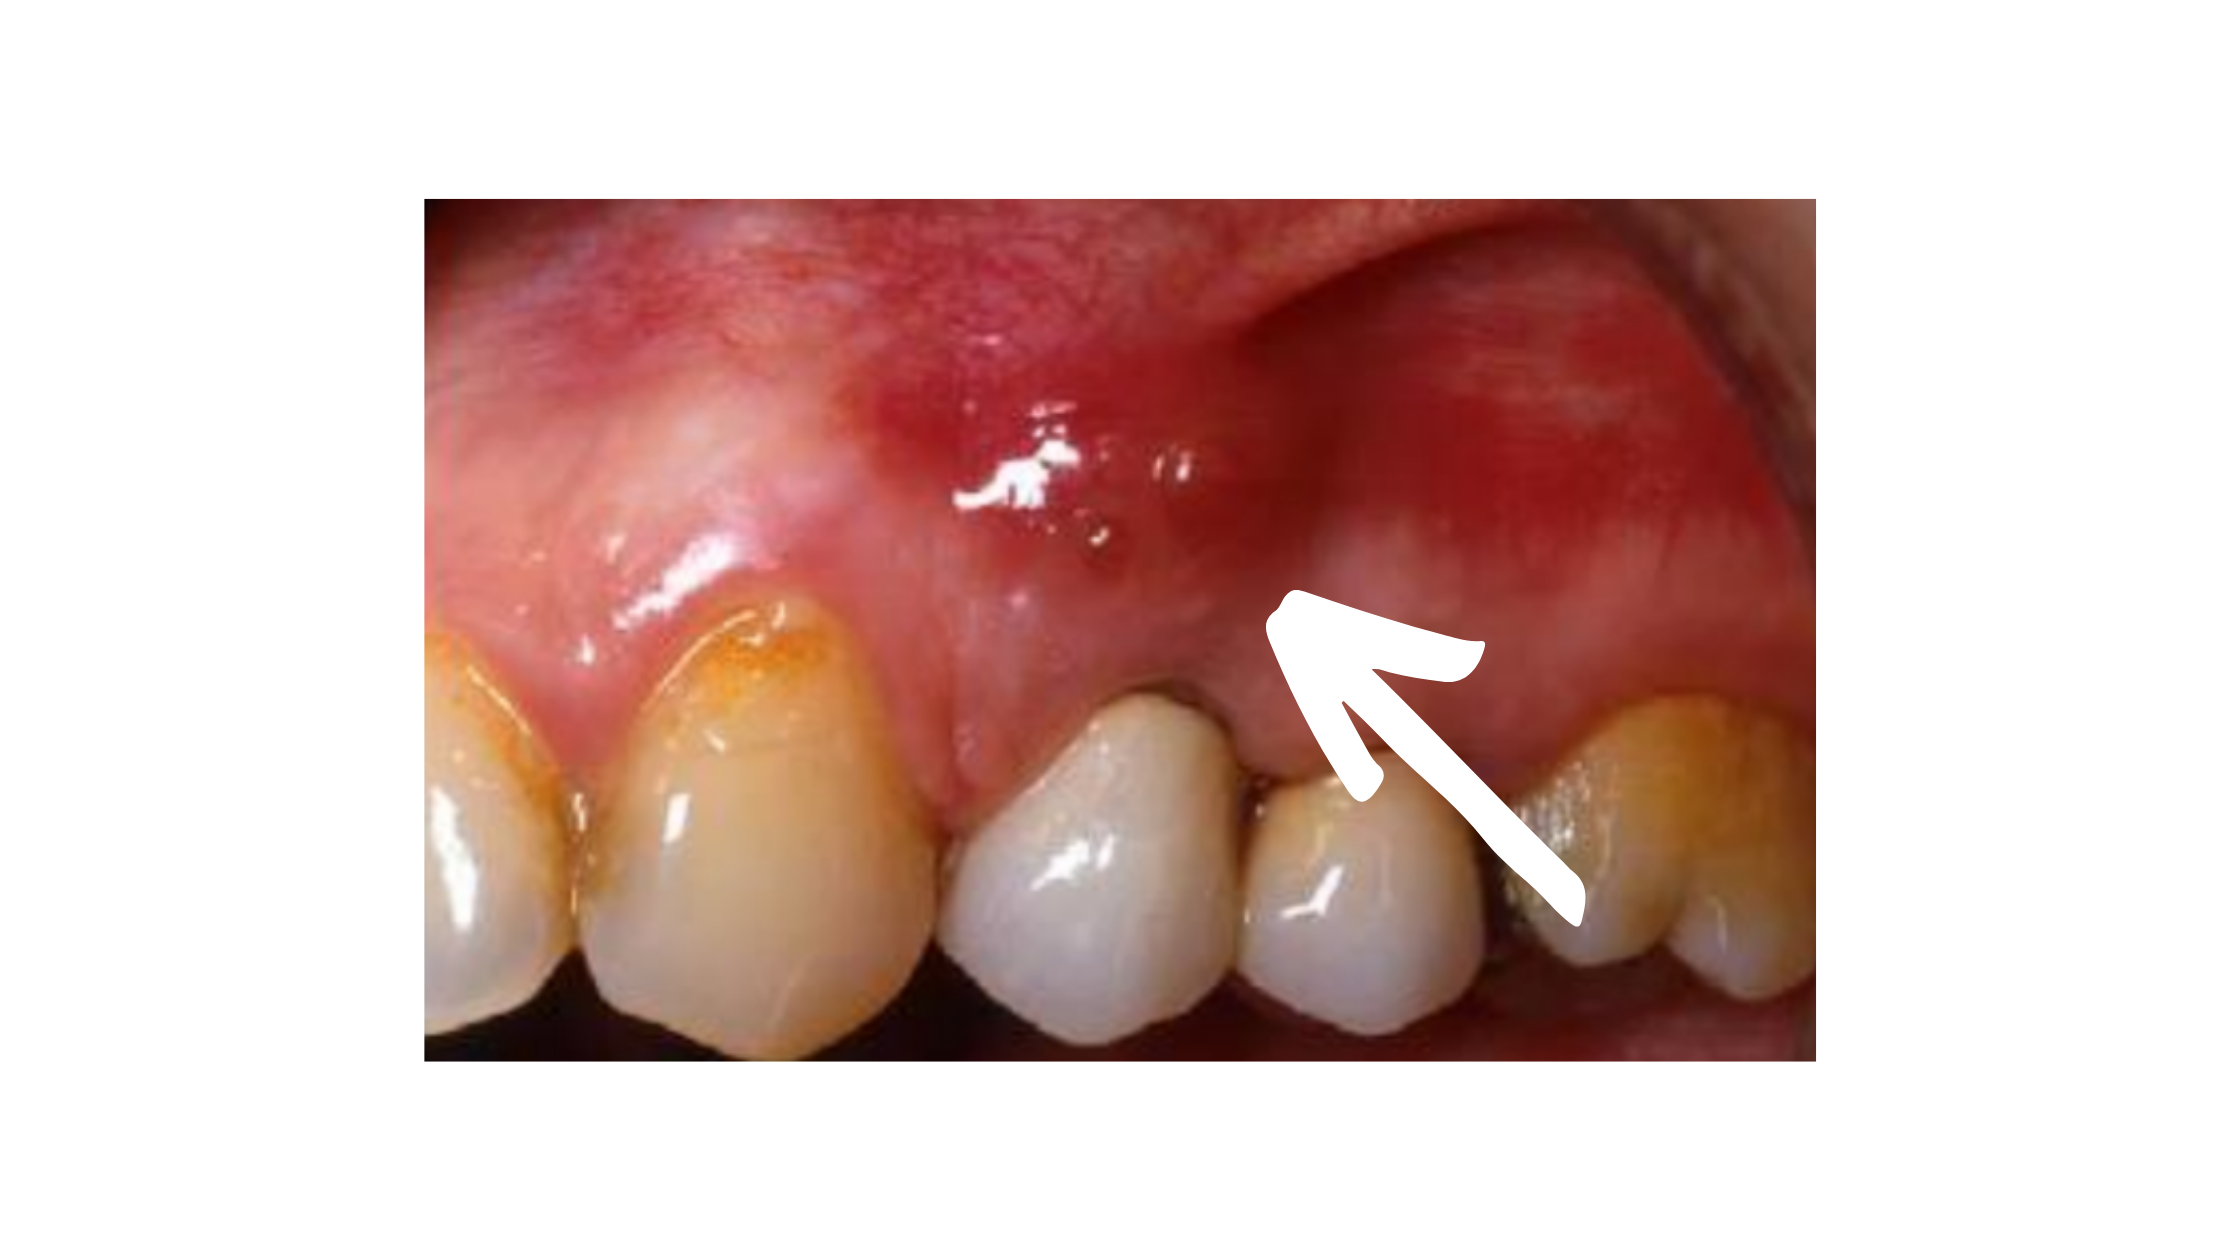 Clinical image of periapical abscess